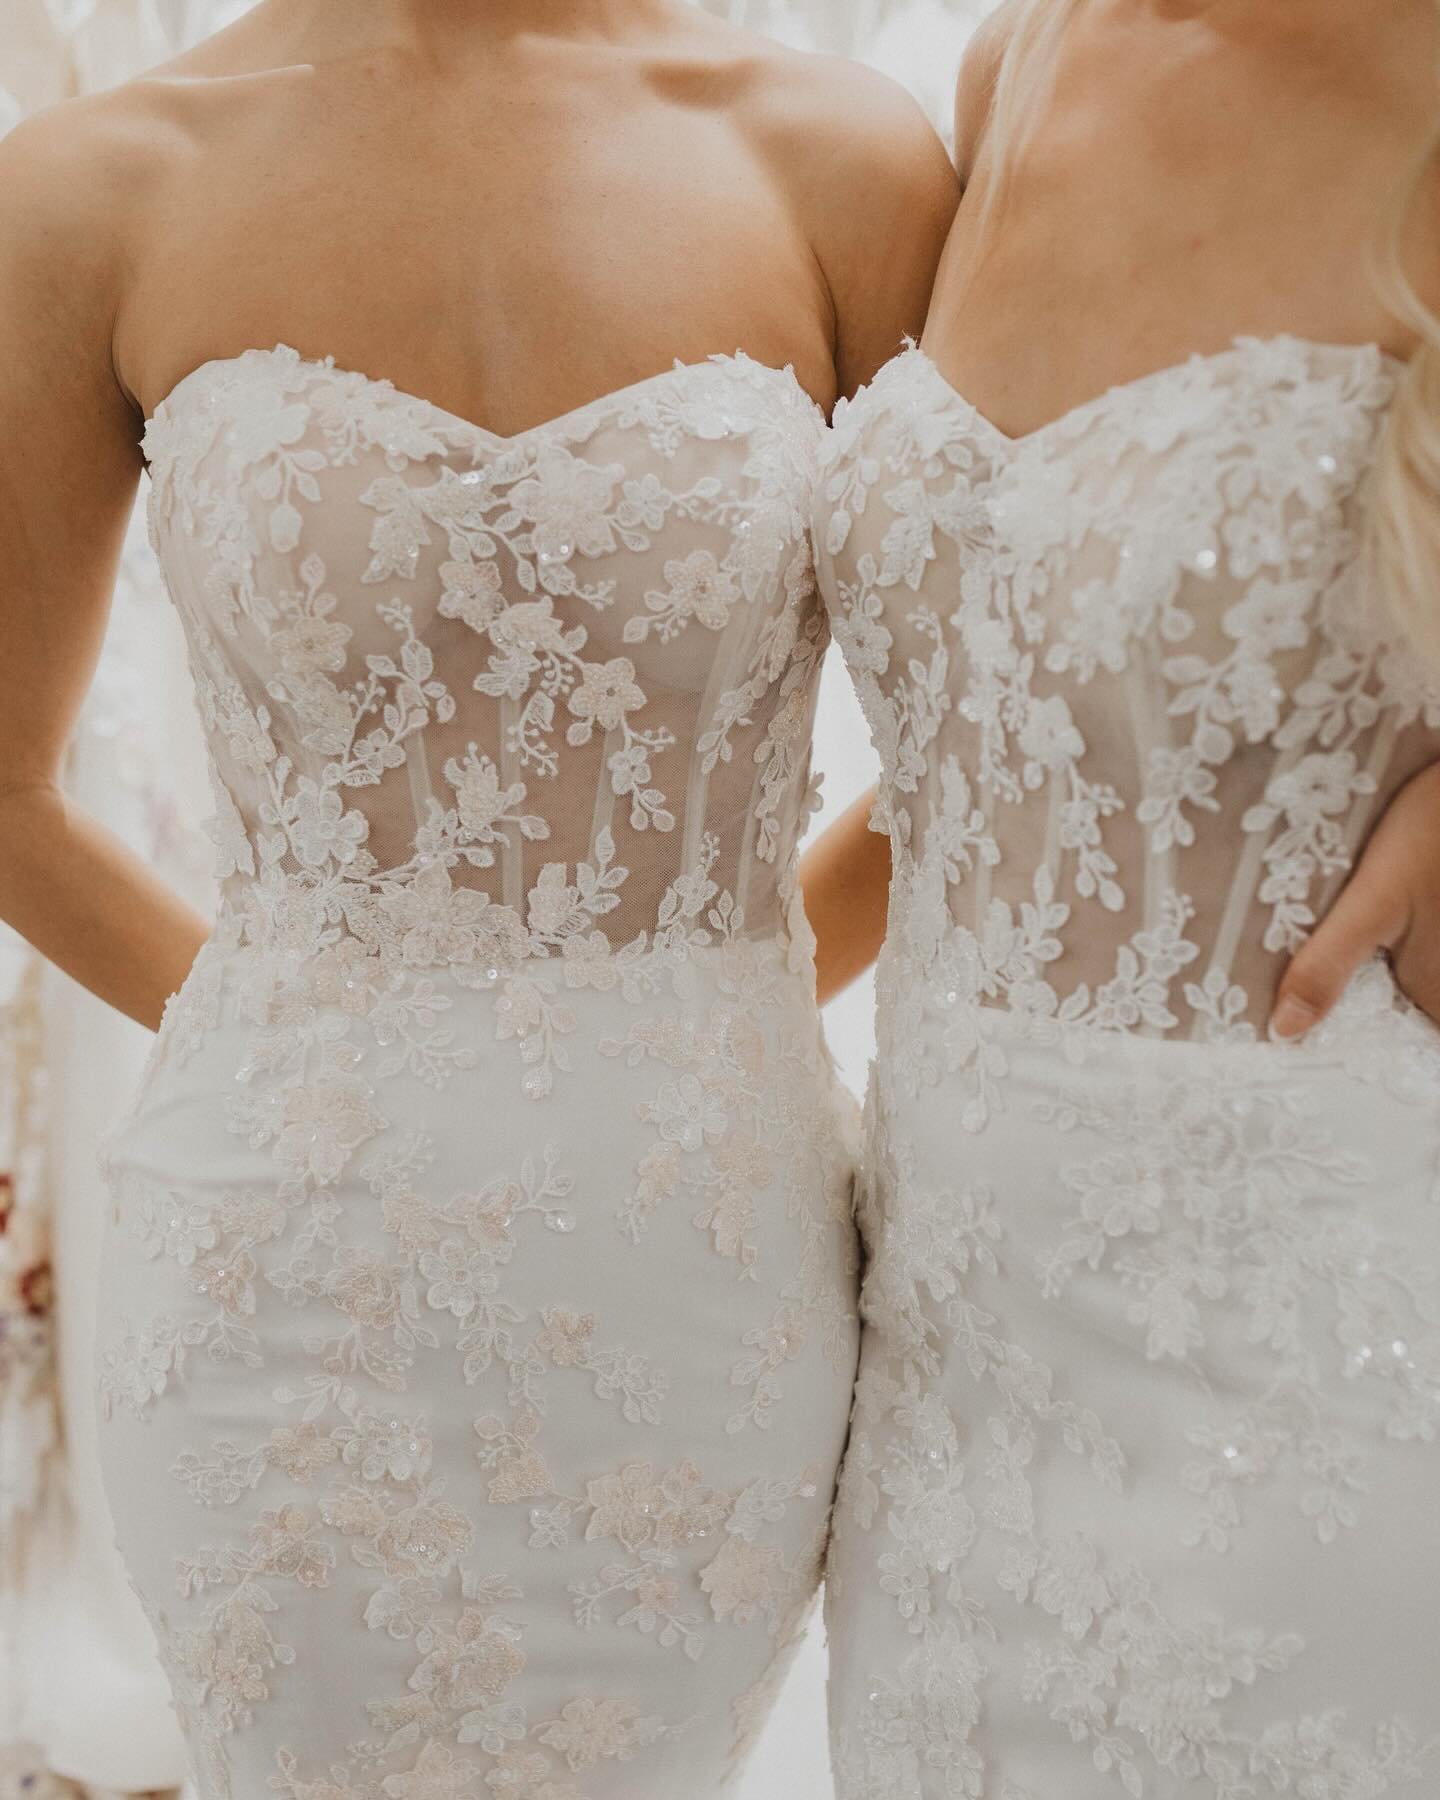 Bridal Market recap + upcoming trend alerts blog is up on our site [ hint :: textures, corsets, florals, power slits + more ] ✨ Check it, my friends 🫶 Link in bio. // 📷 :: @alyssabarletter